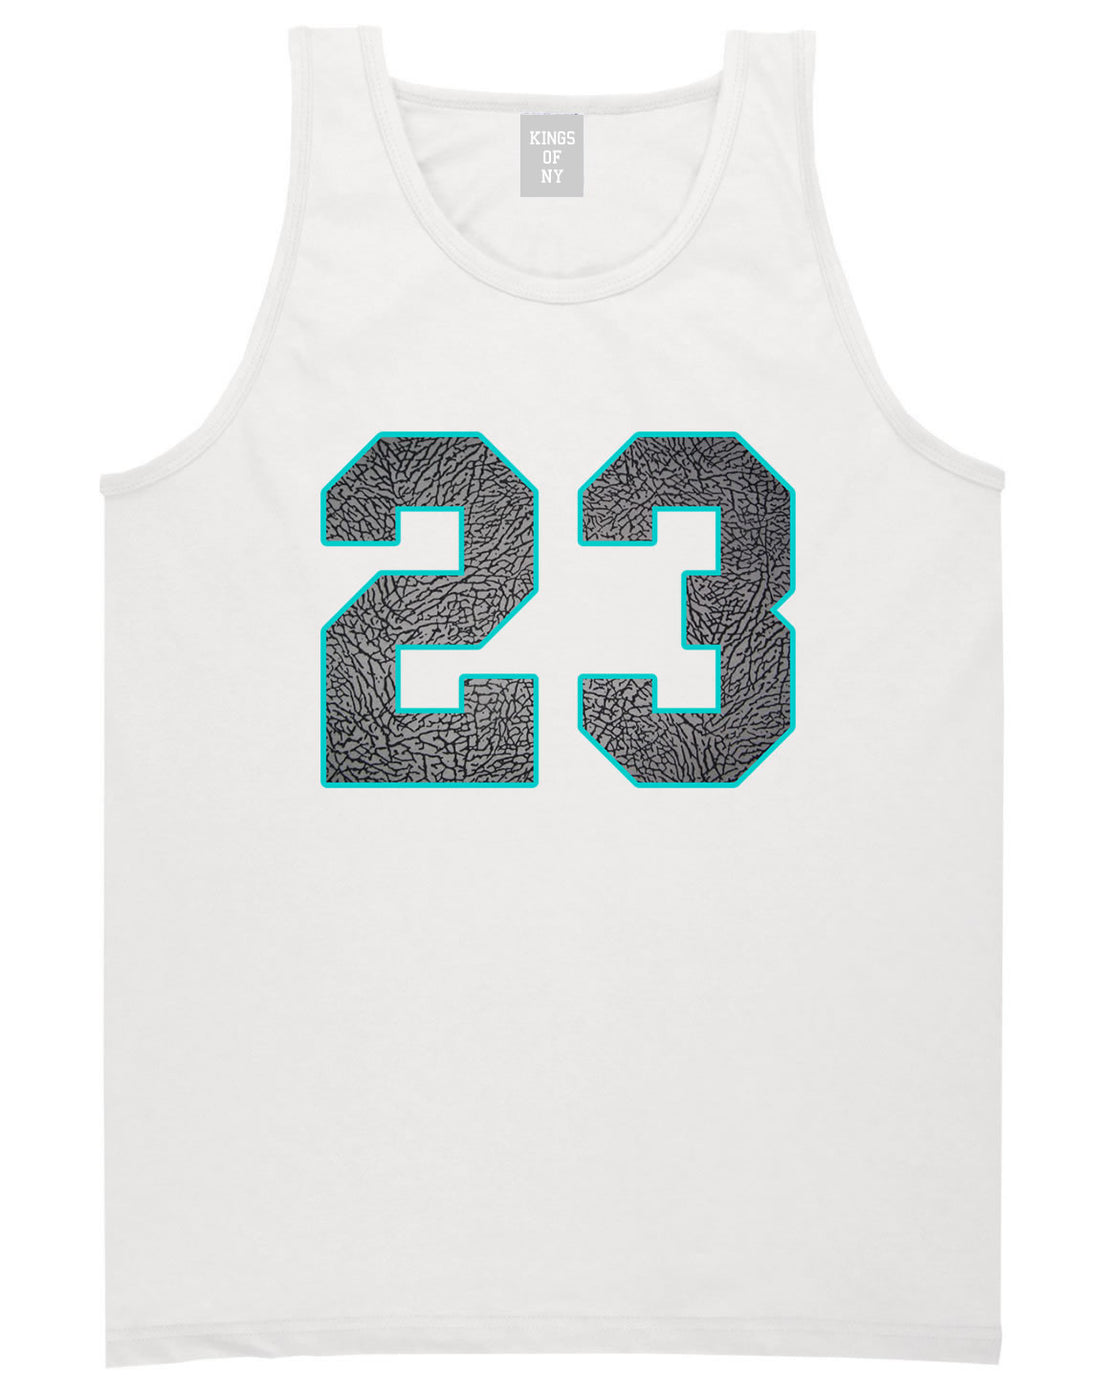 23 Cement Blue Jersey Tank Top in White By Kings Of NY